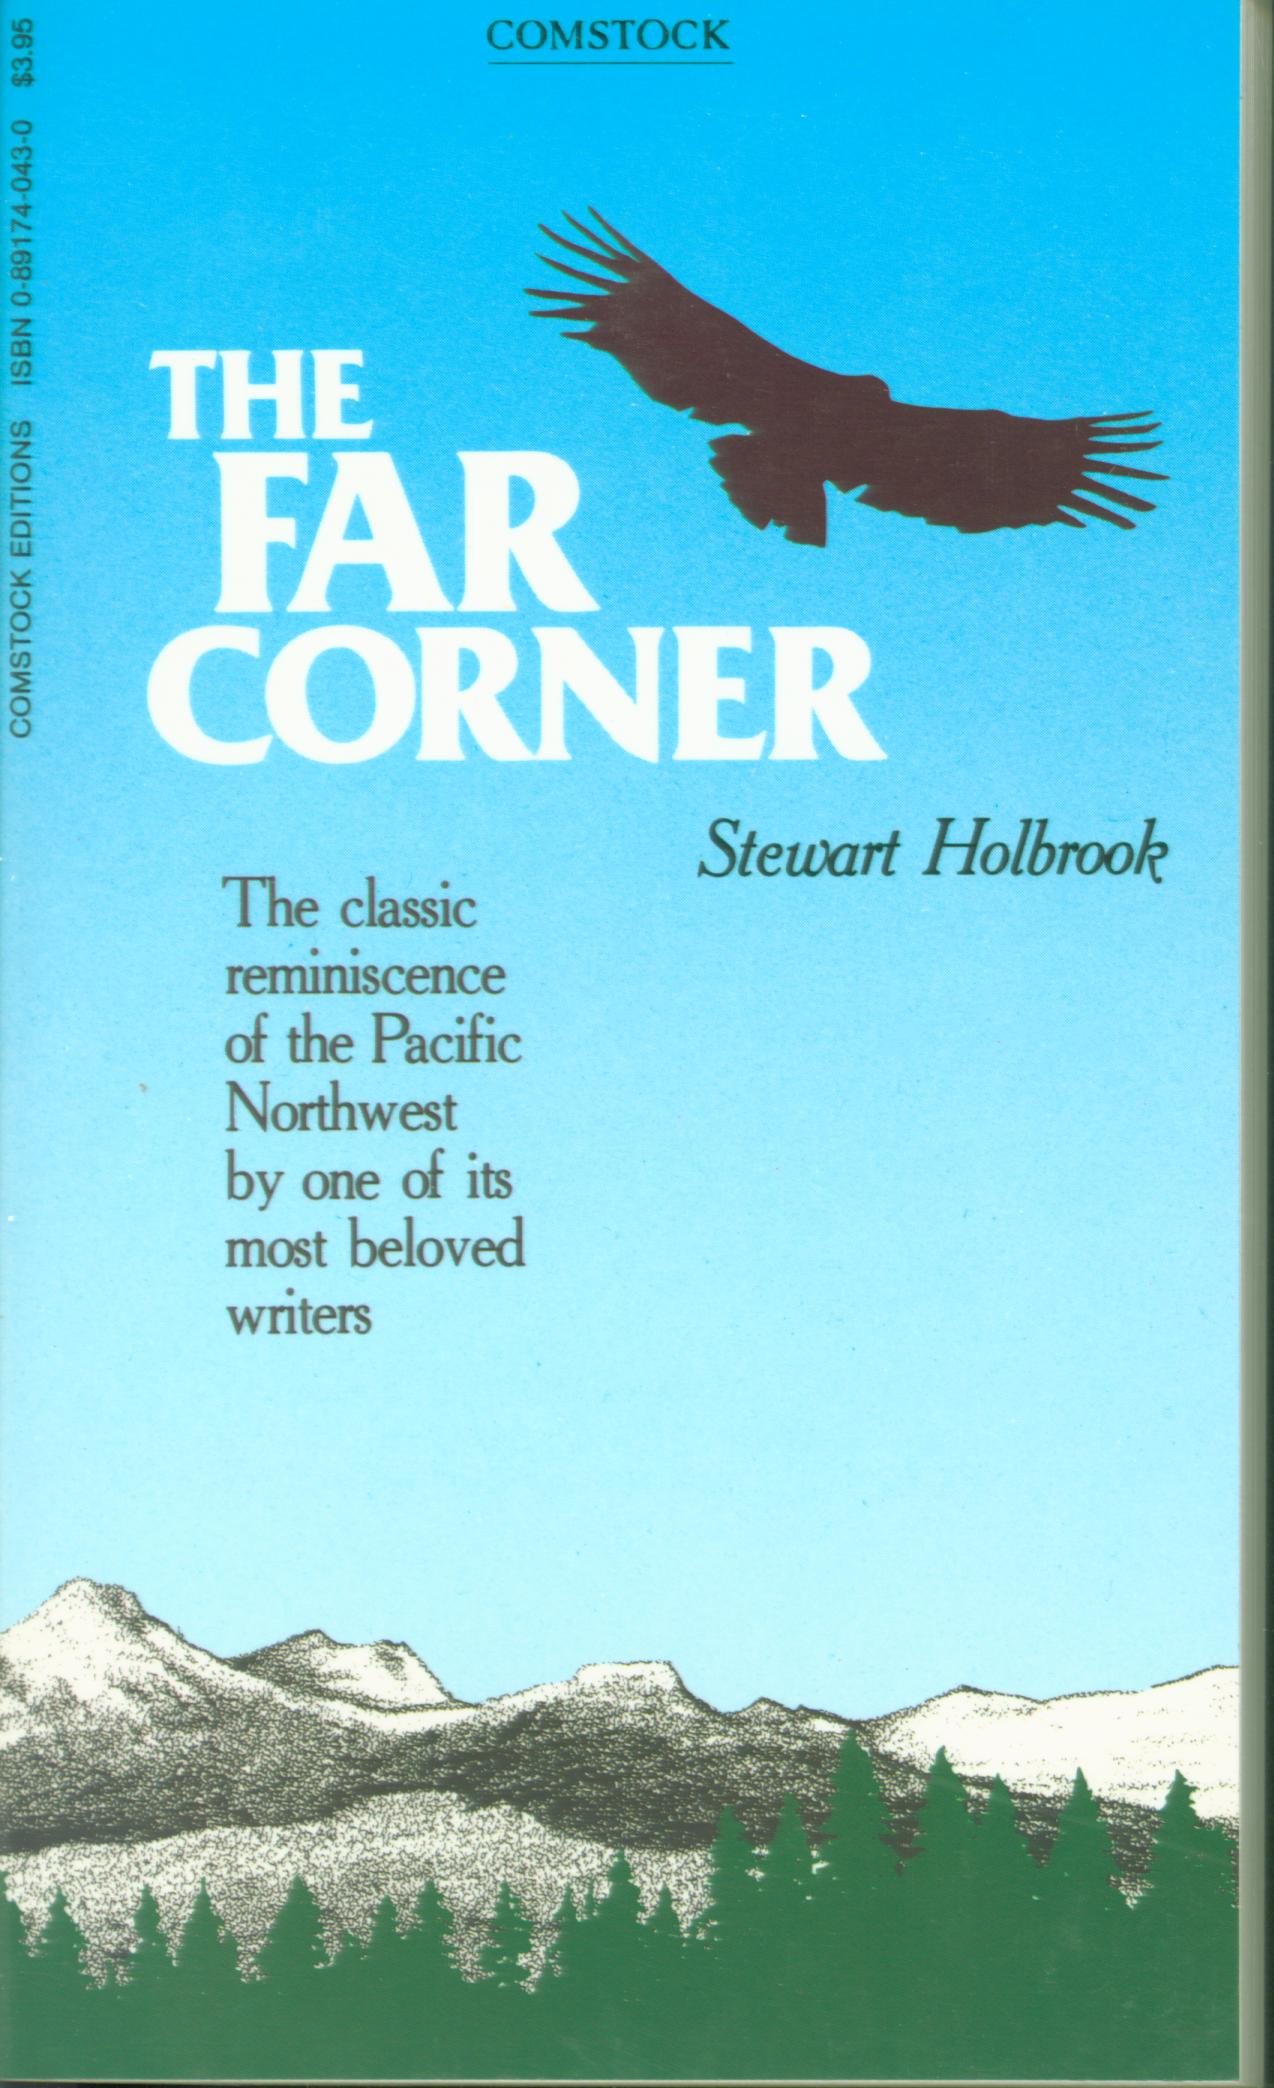 THE FAR CORNER: a personal view of the Pacific Northwest. 